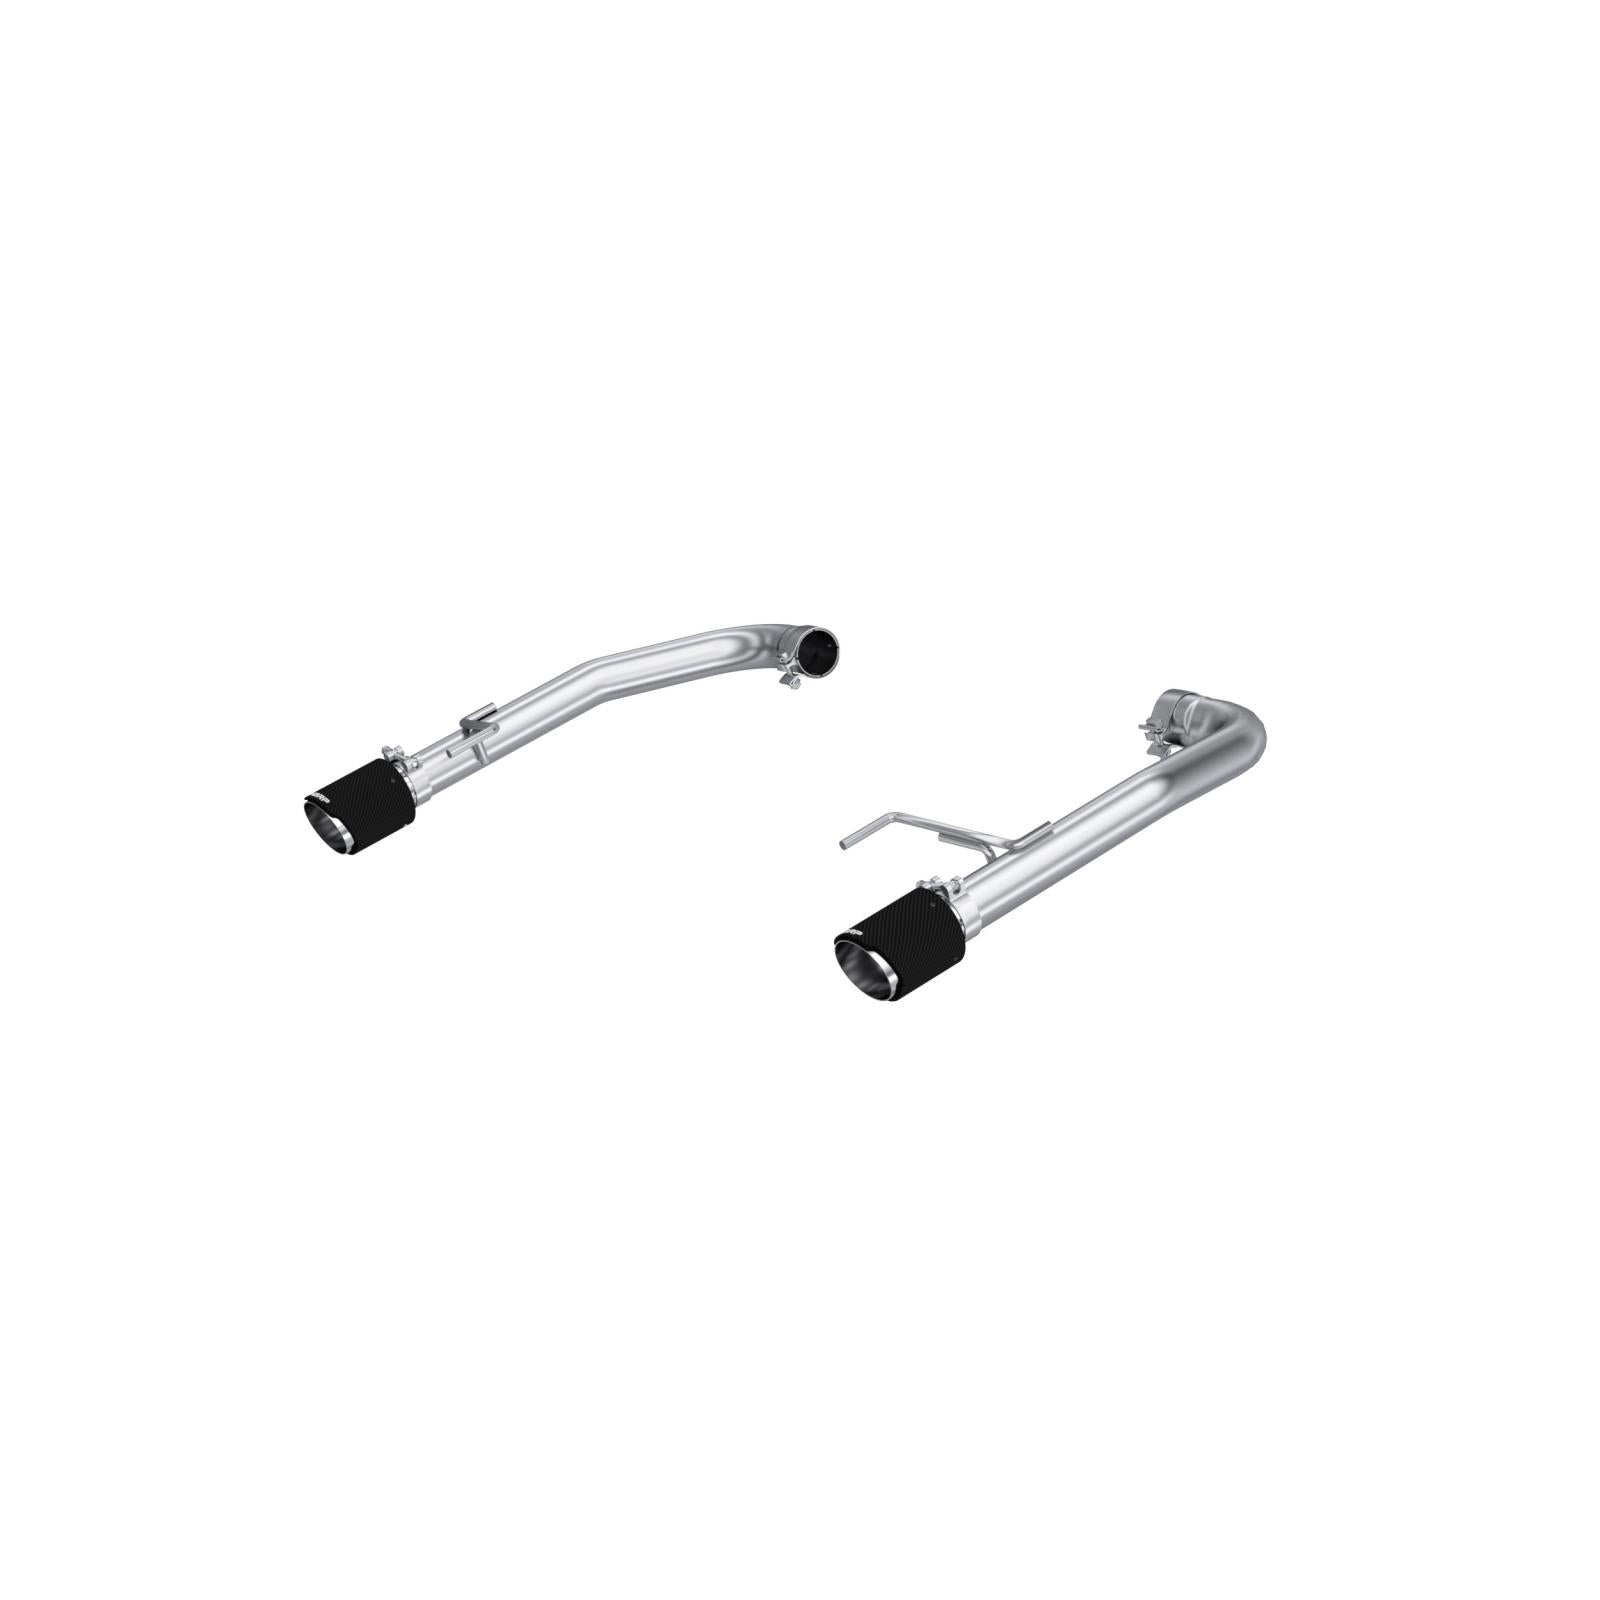 MBRP Exhaust 2015-2017 Ford Mustang GT 5.0L, T305 Stainless Steel 2.5 Inch Axle-Back with Carbon Fiber Tips, MBRP S72763CF